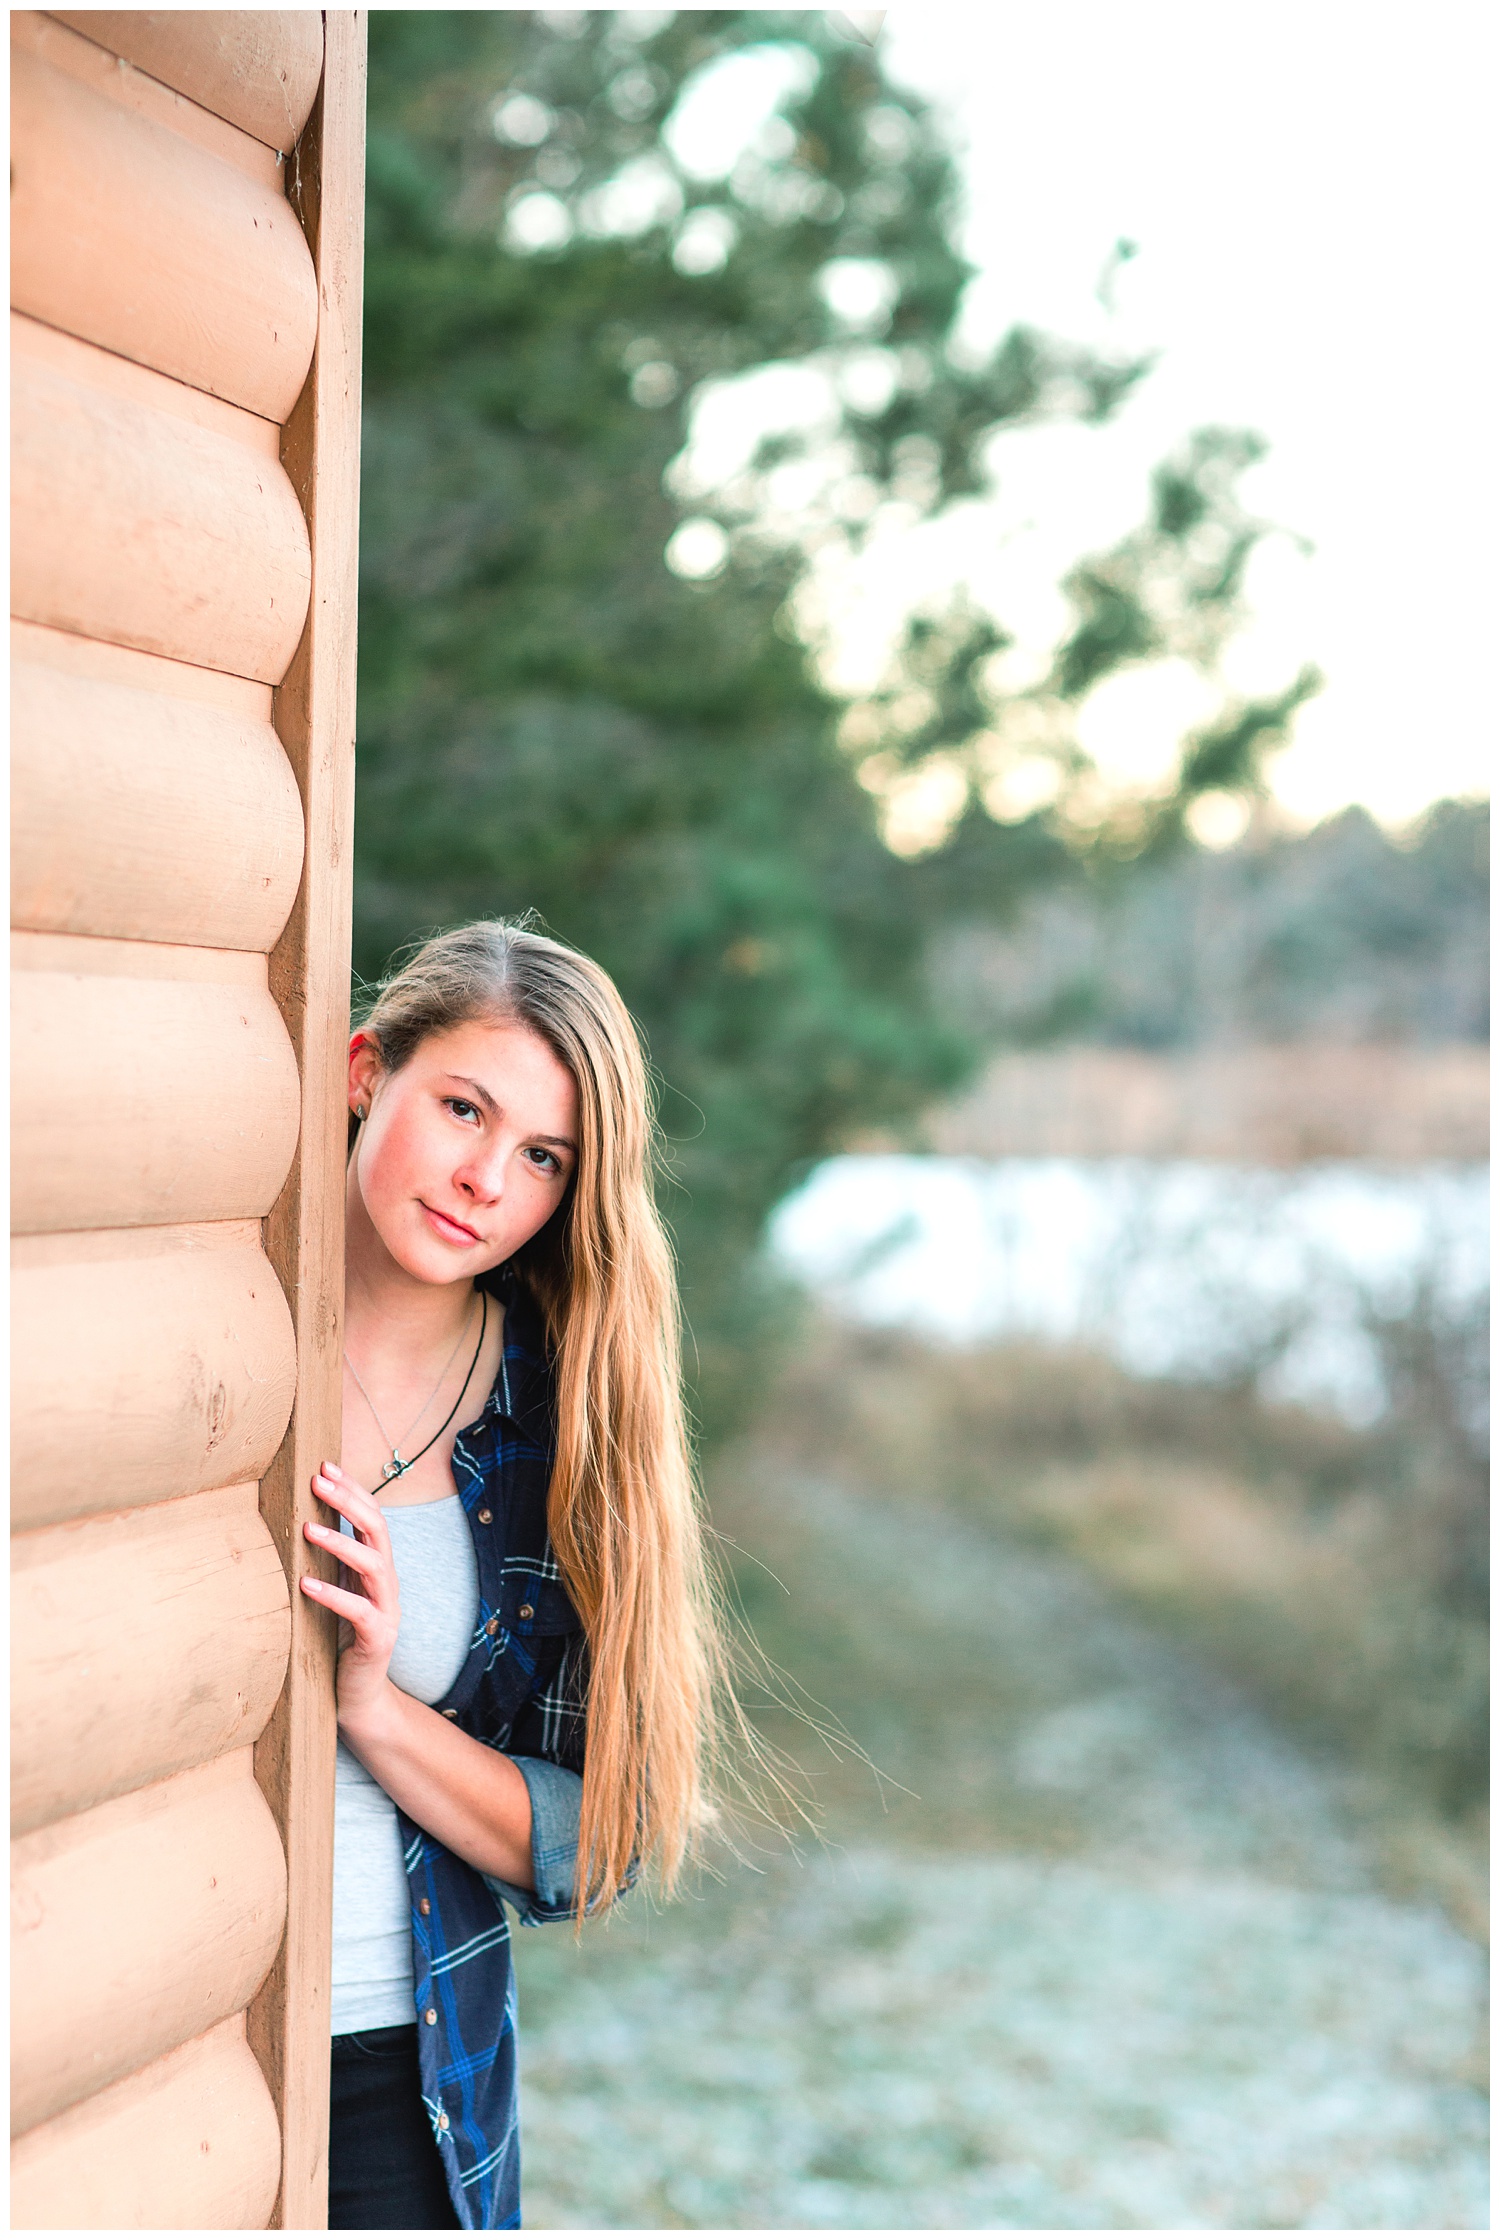 Senior girl peeking out from behind a wood building in a park with a lake during the fall | Iowa Senior Photographer | CB Studio